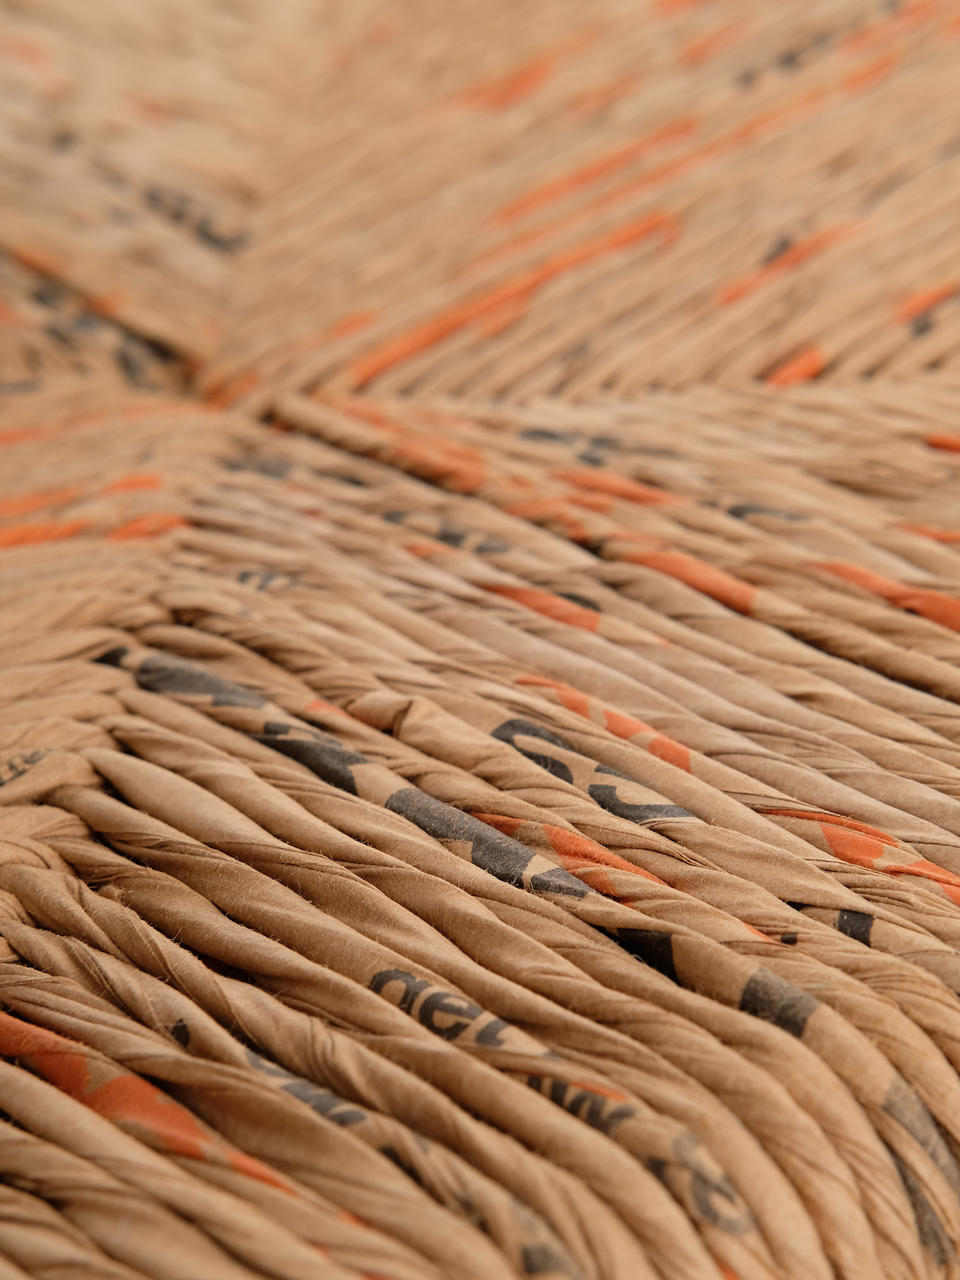 Photo of the woven seat of Big Box Vernacular, made from cut and twisted paper bags intended for lawn waste.